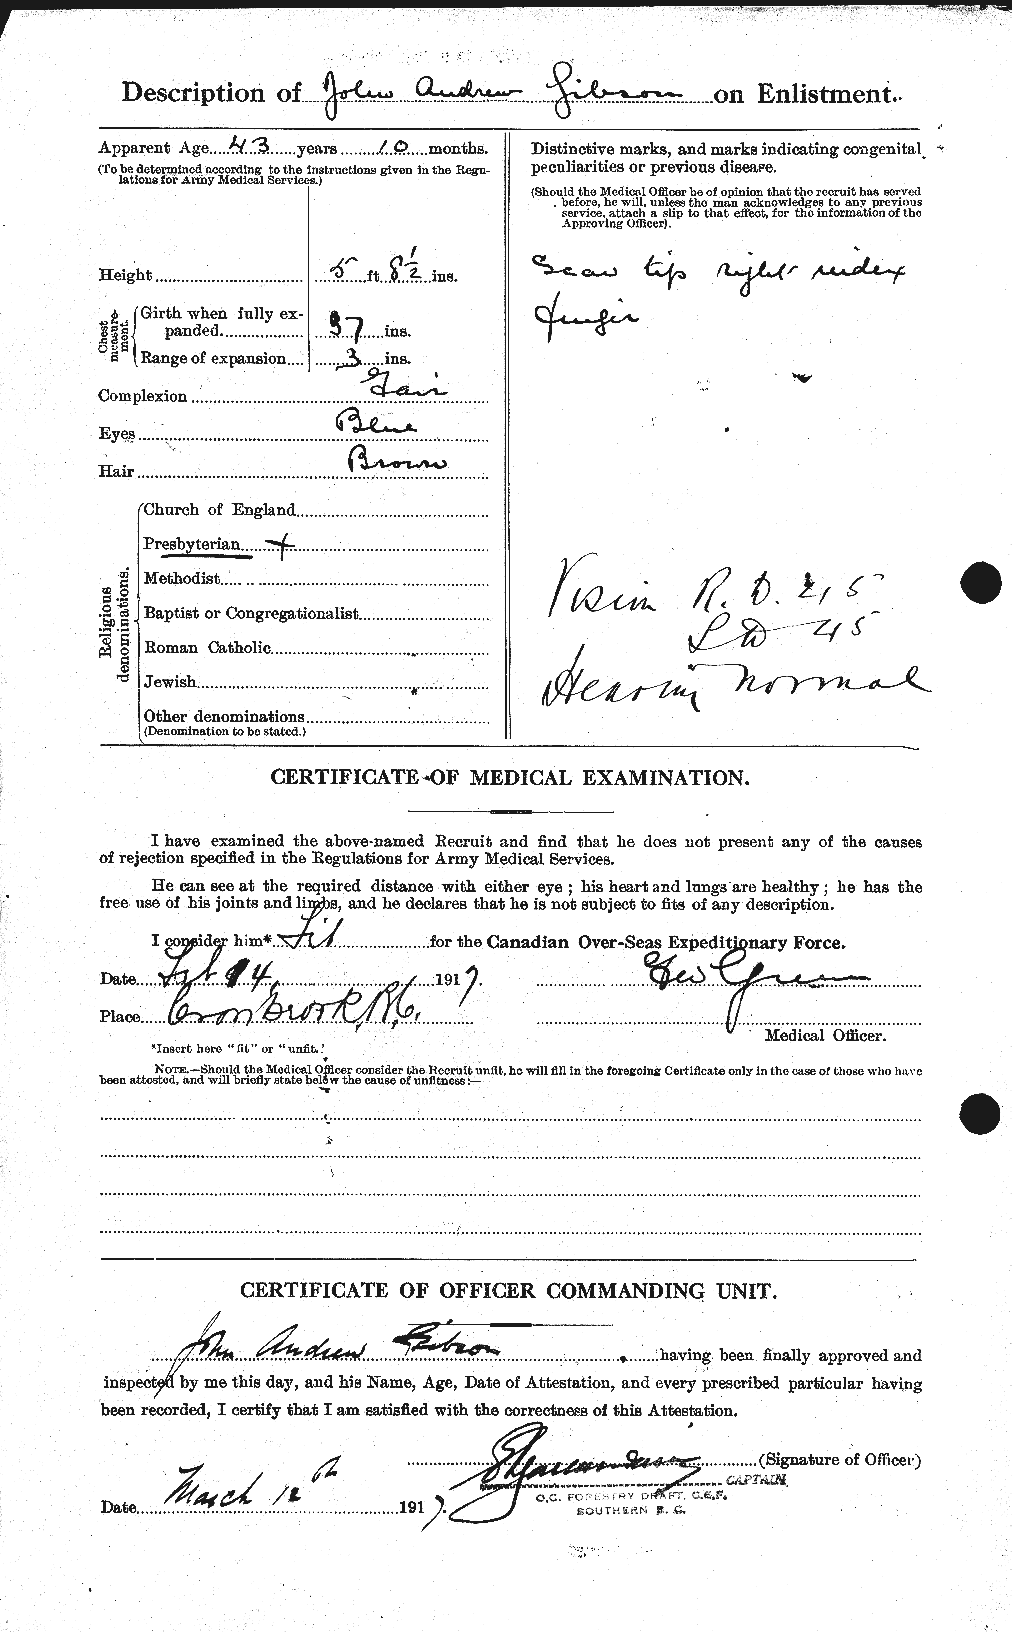 Personnel Records of the First World War - CEF 348622b